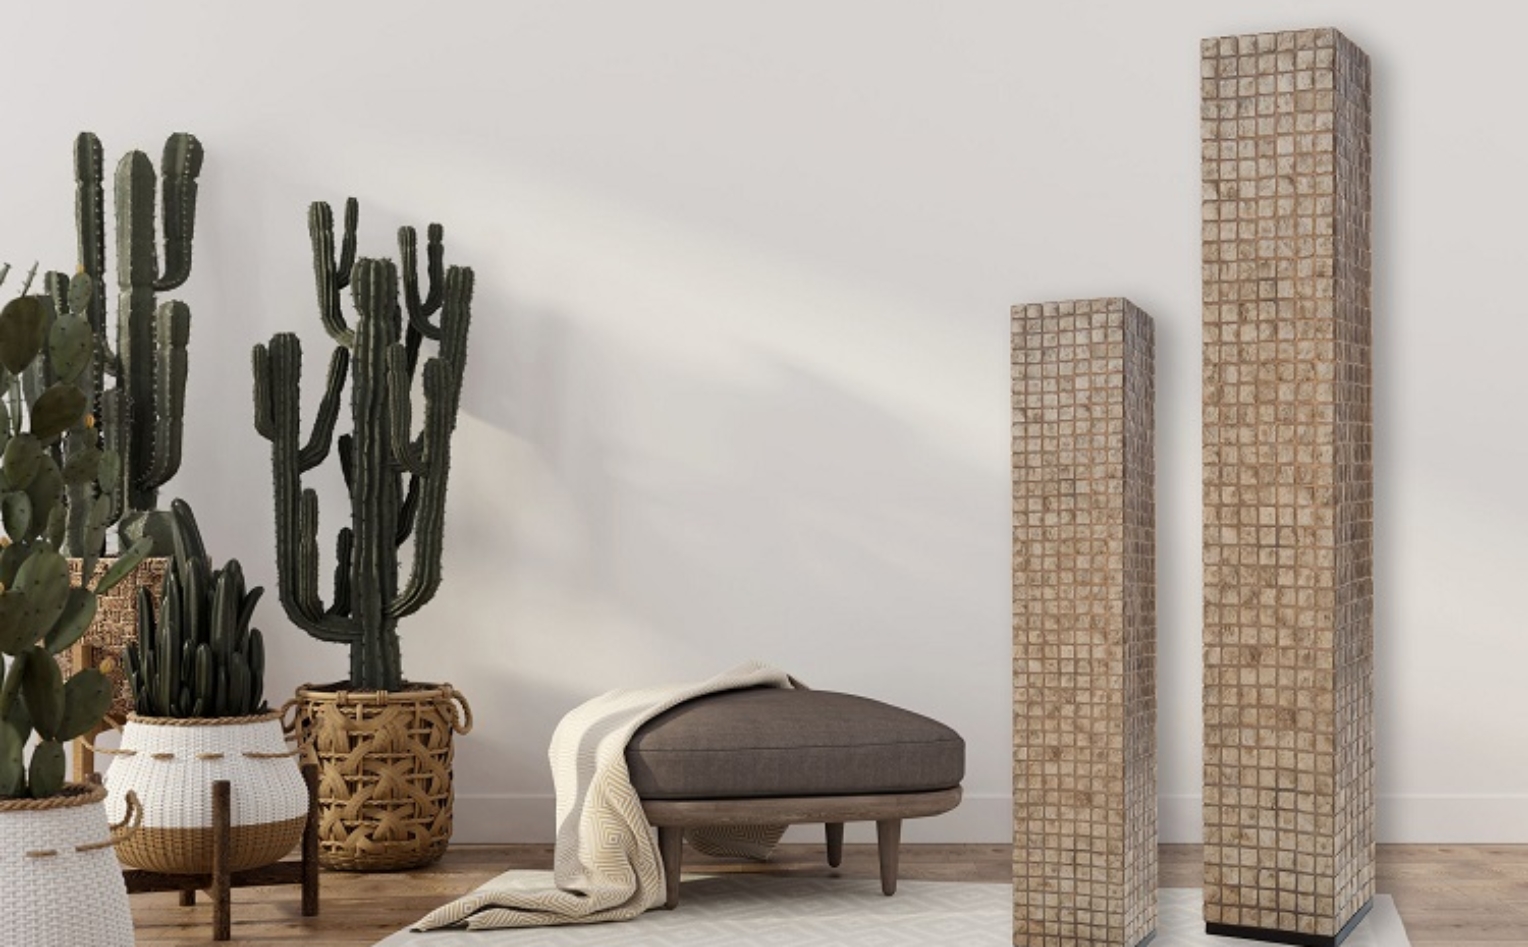 Boho-style interior with leather pouf and cacti